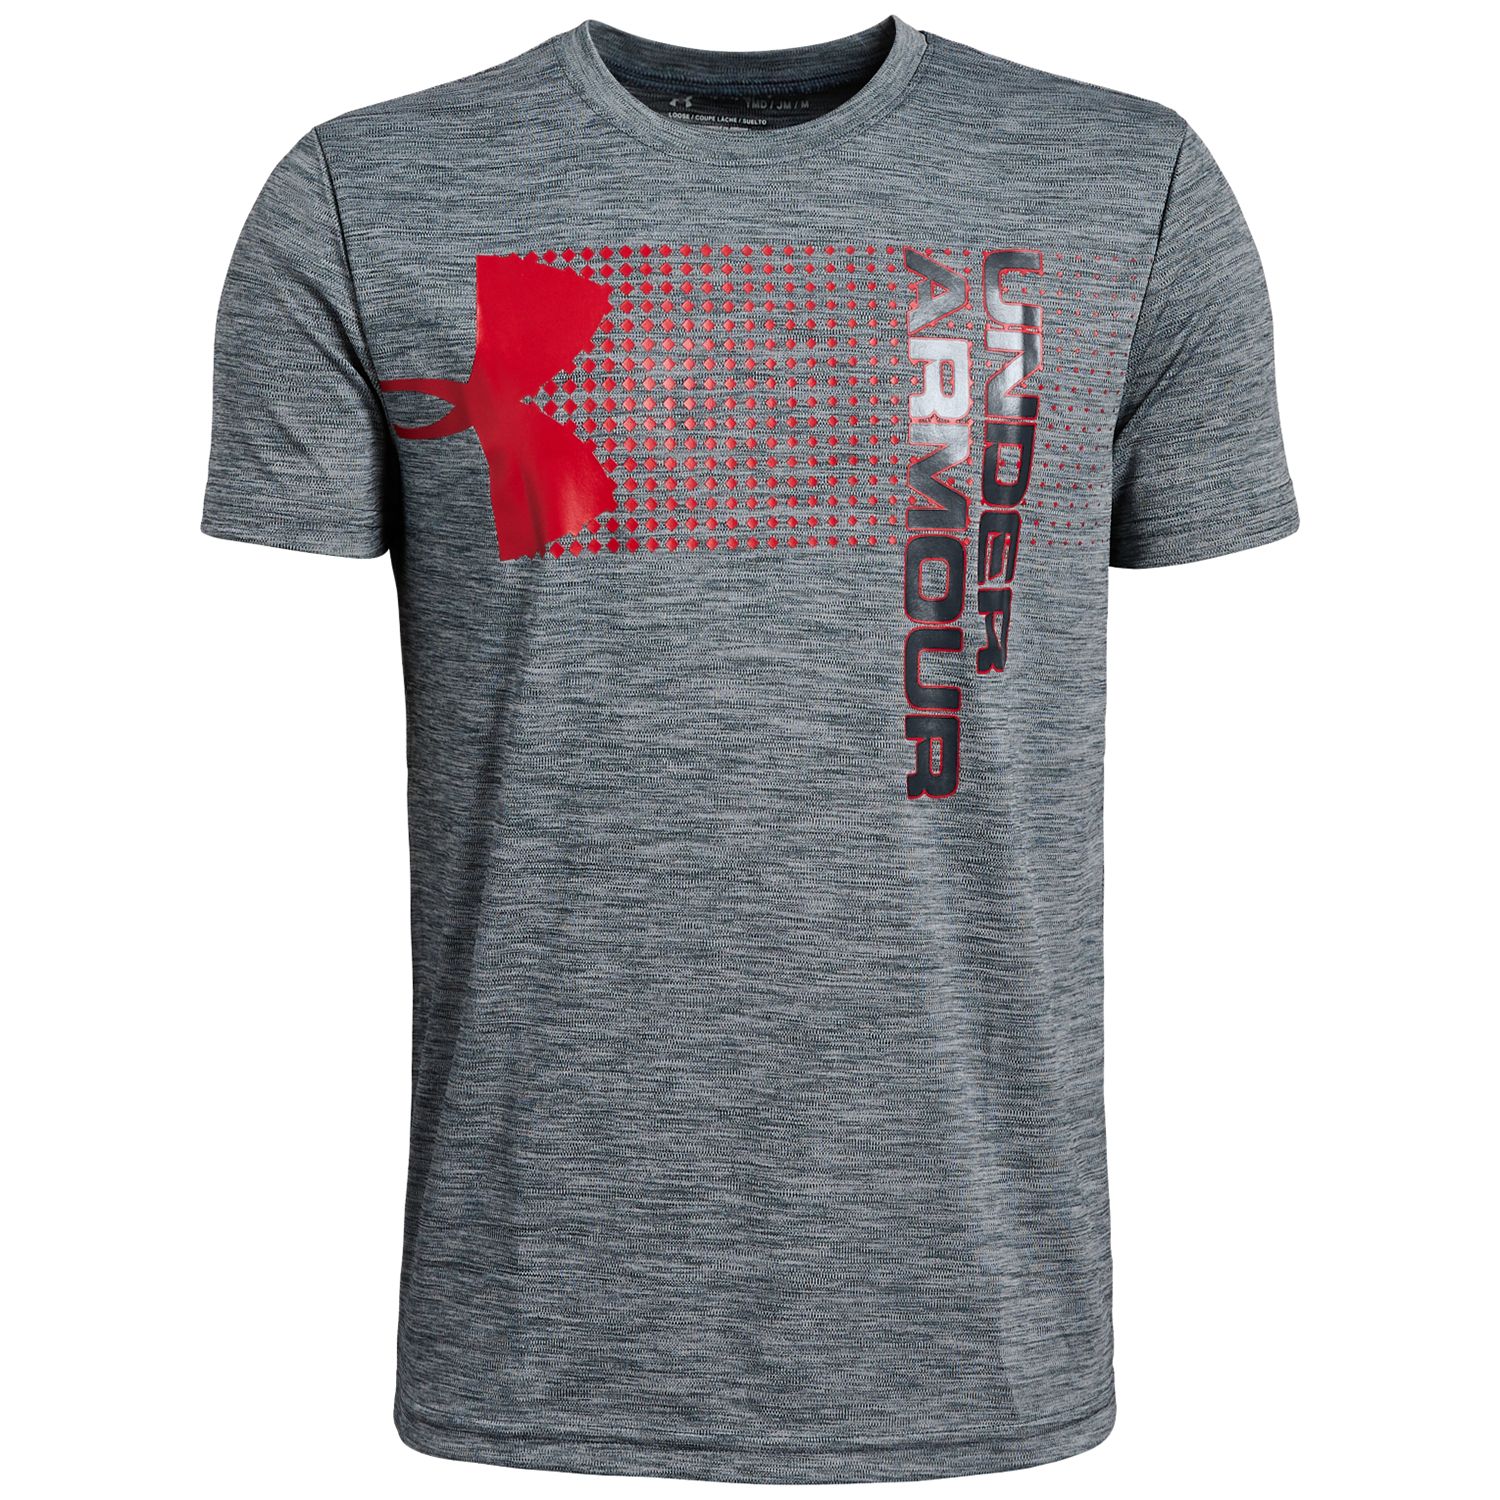 Under Armour Active Tops, Clothing | Kohl's